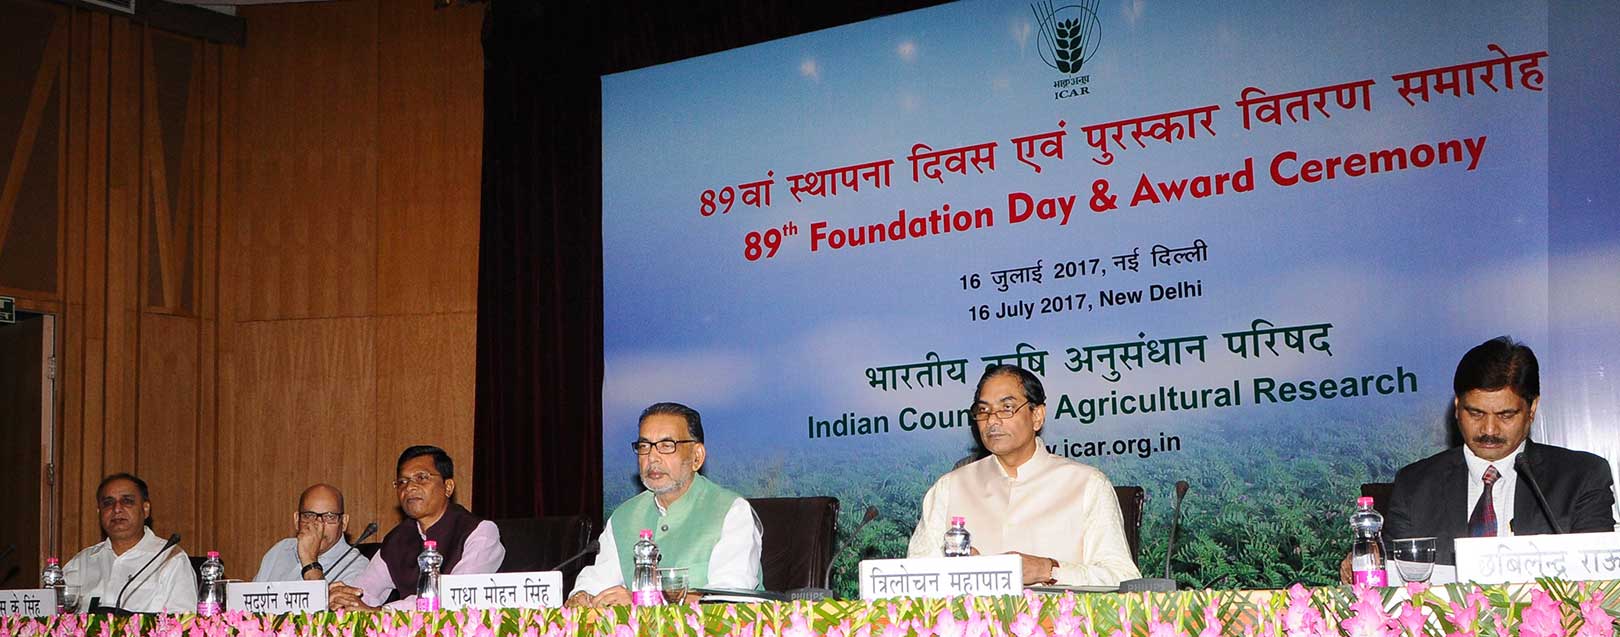 'Country will become self-sufficient in oilseeds and pulses production in the coming years'